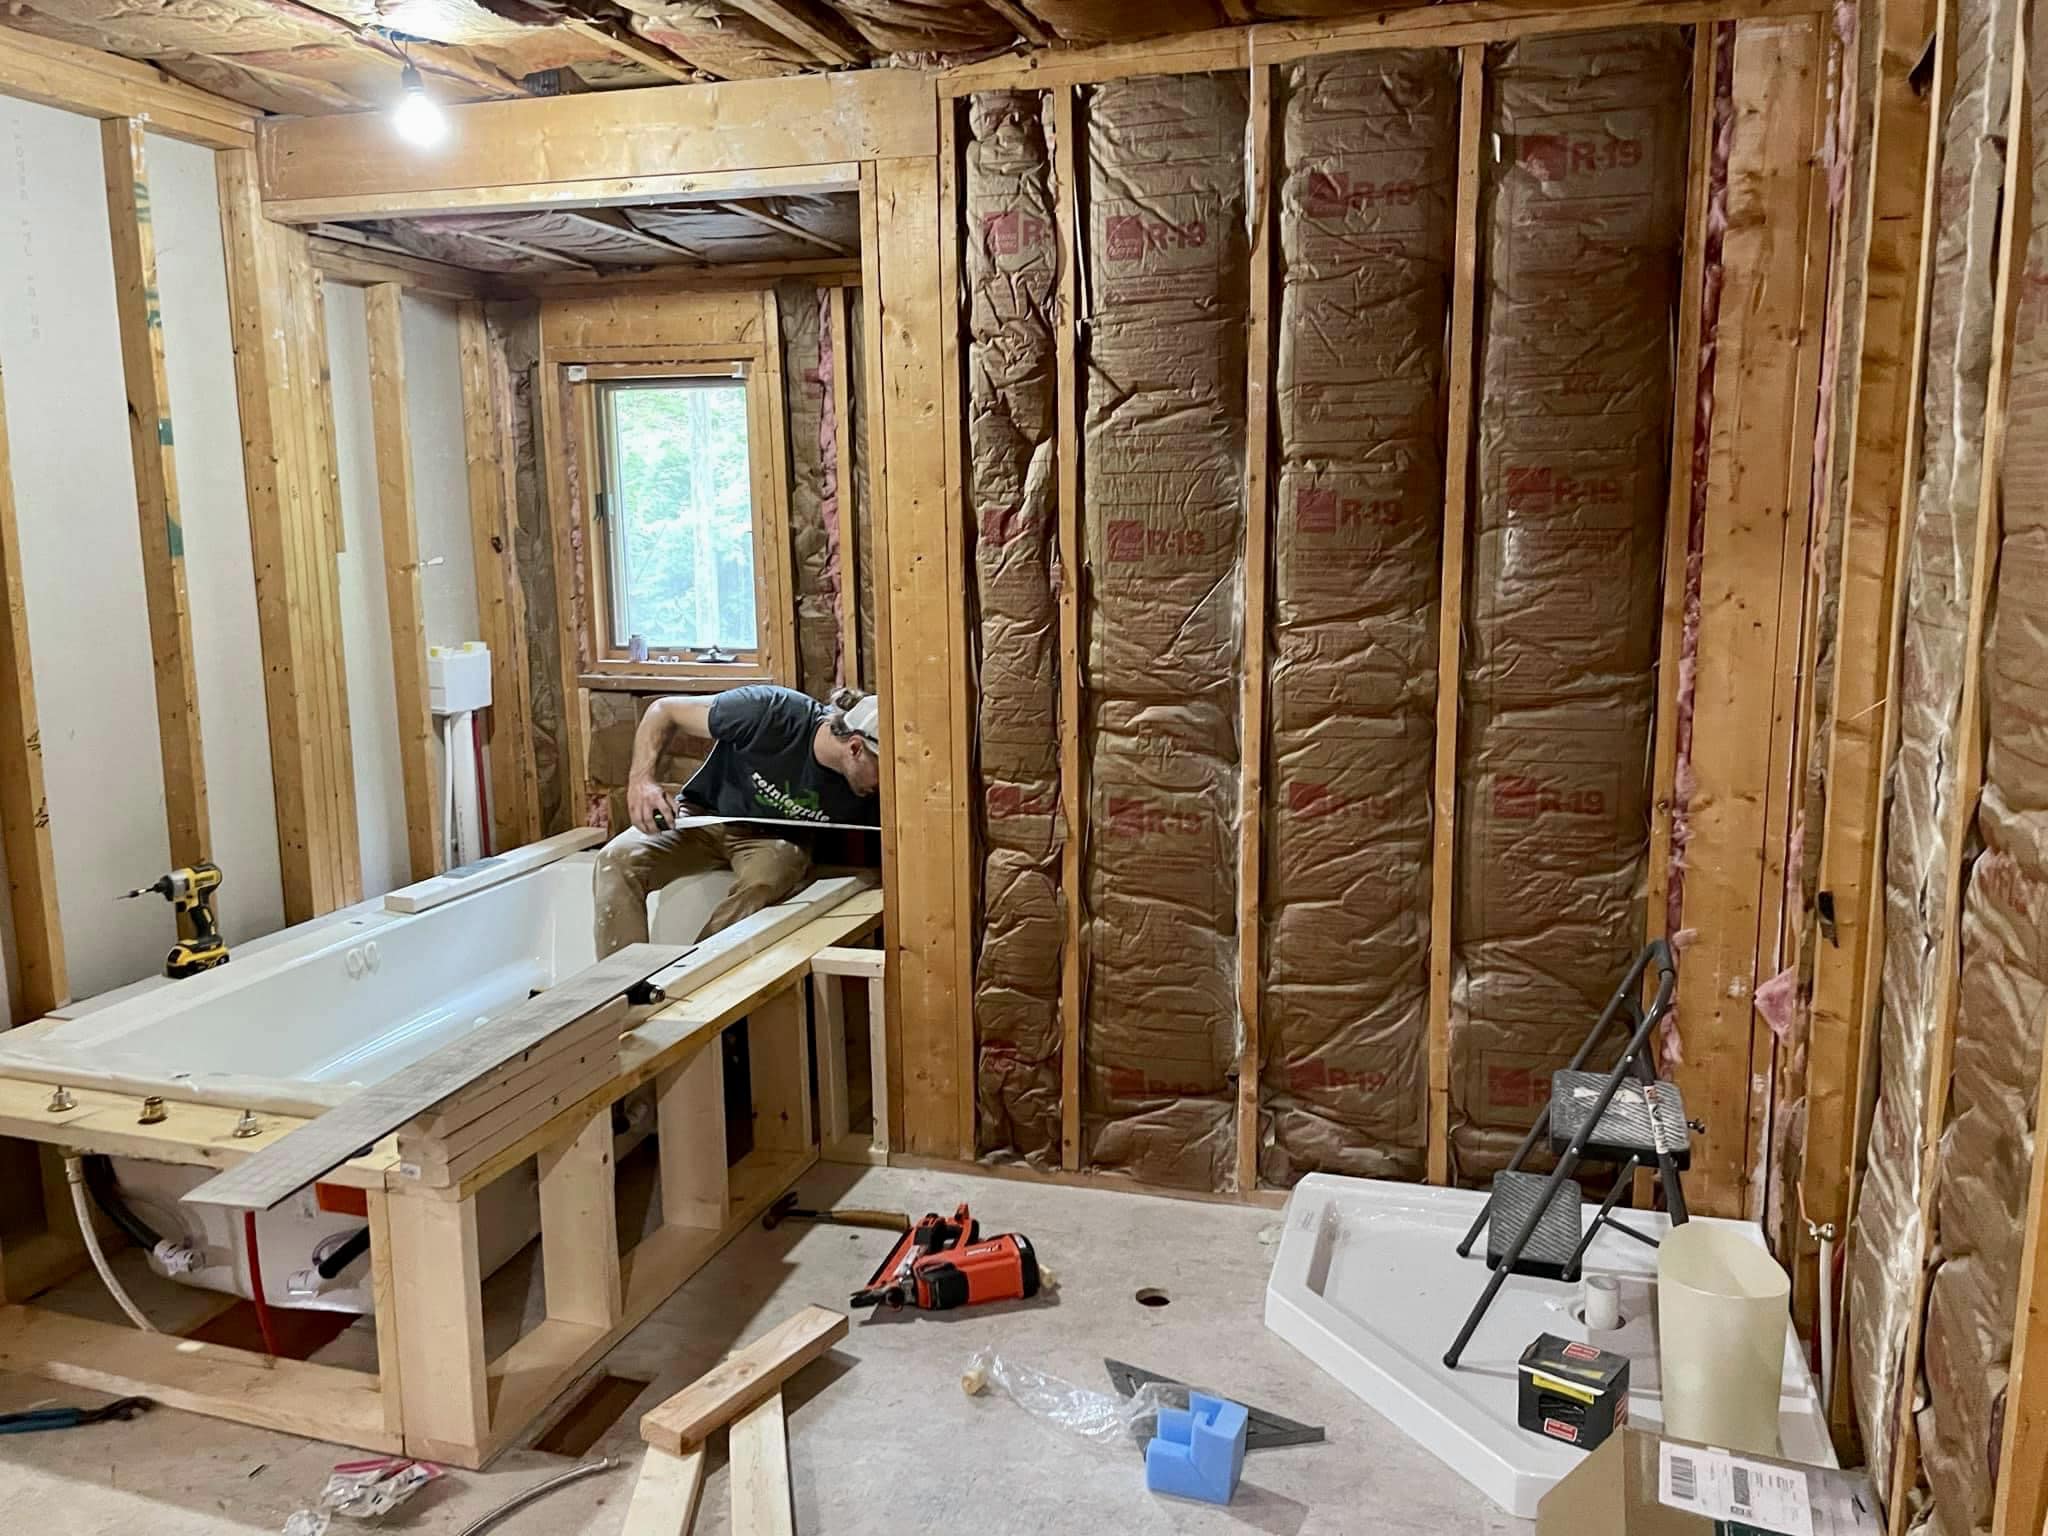 A member of the Reintegrate Appalachia crew working on a bathroom remodel.